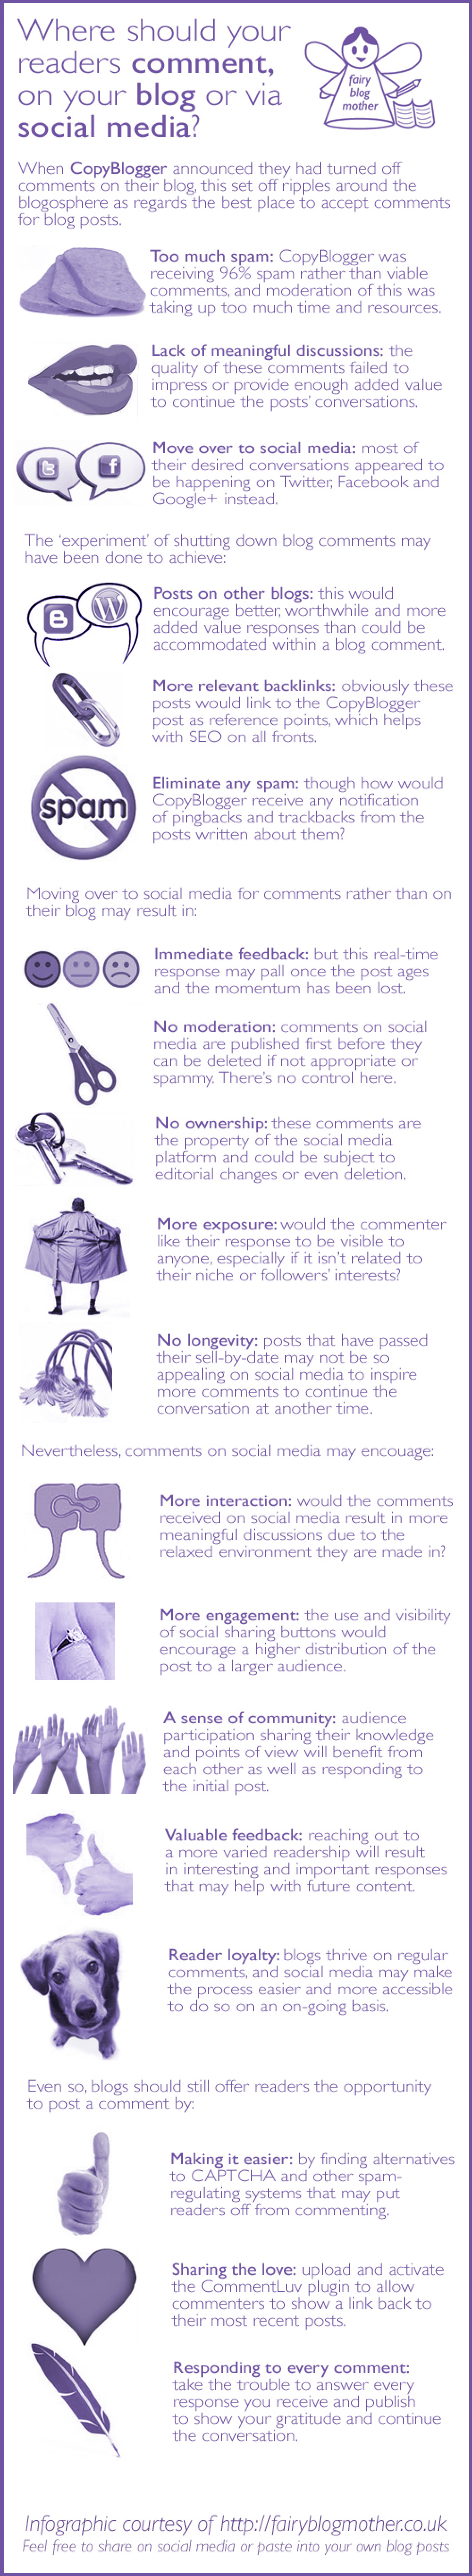 Where should your readers comment, on your blog or via social media? Infographic